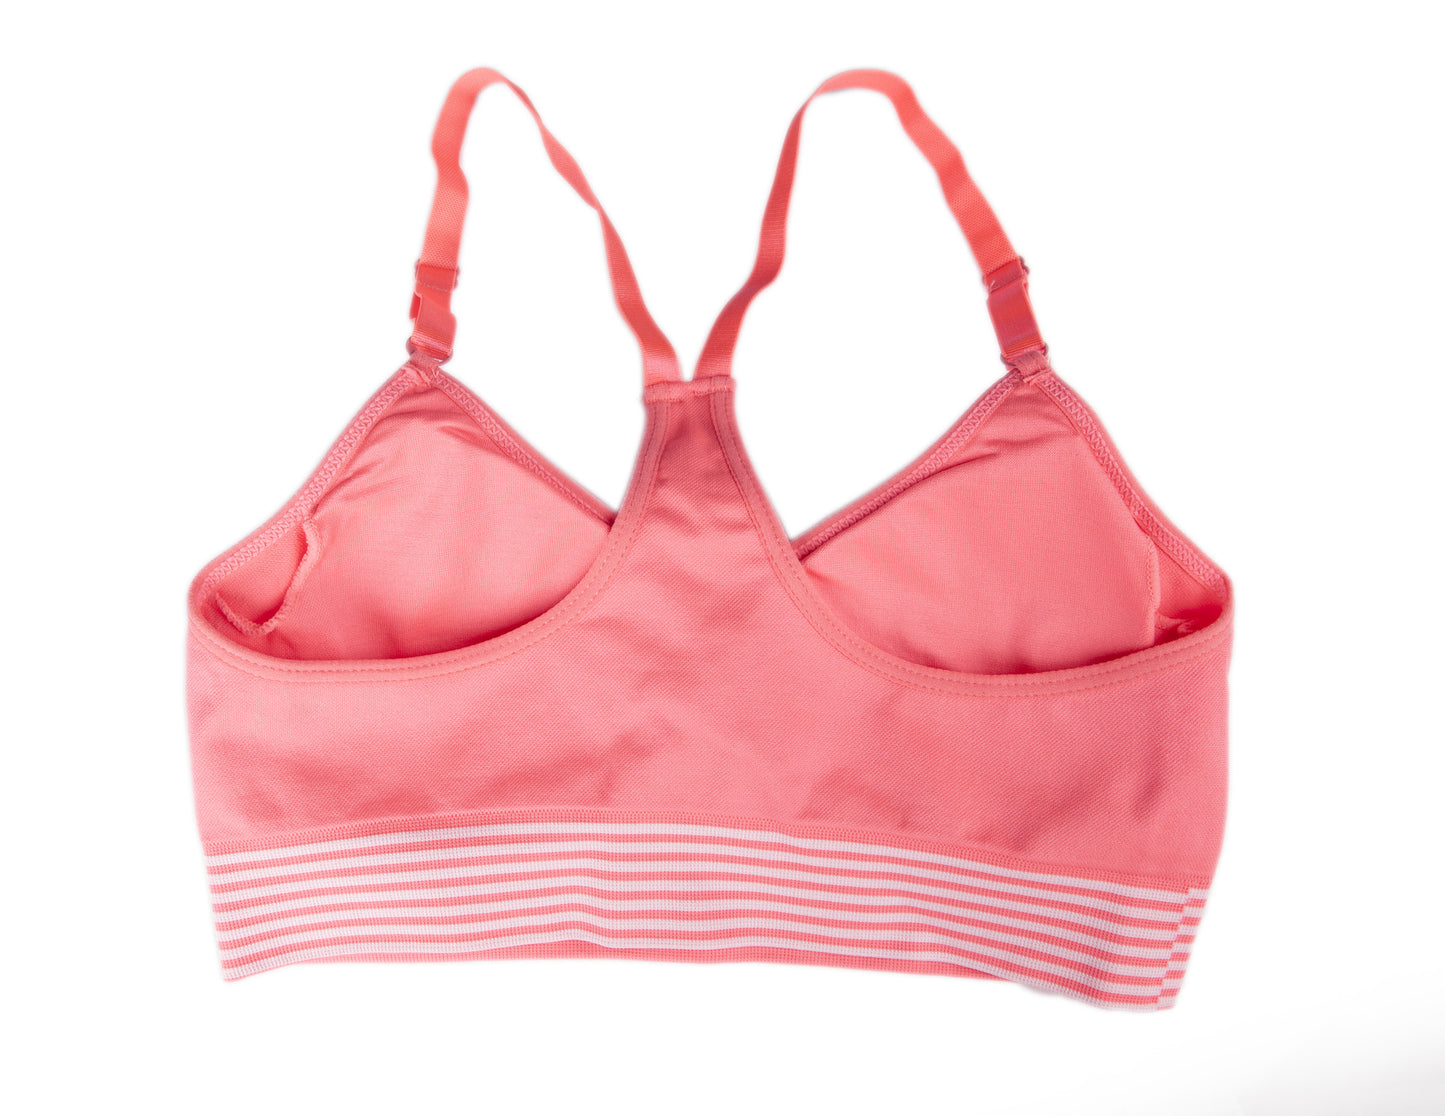 Low Impact Coral and White Sports Bra